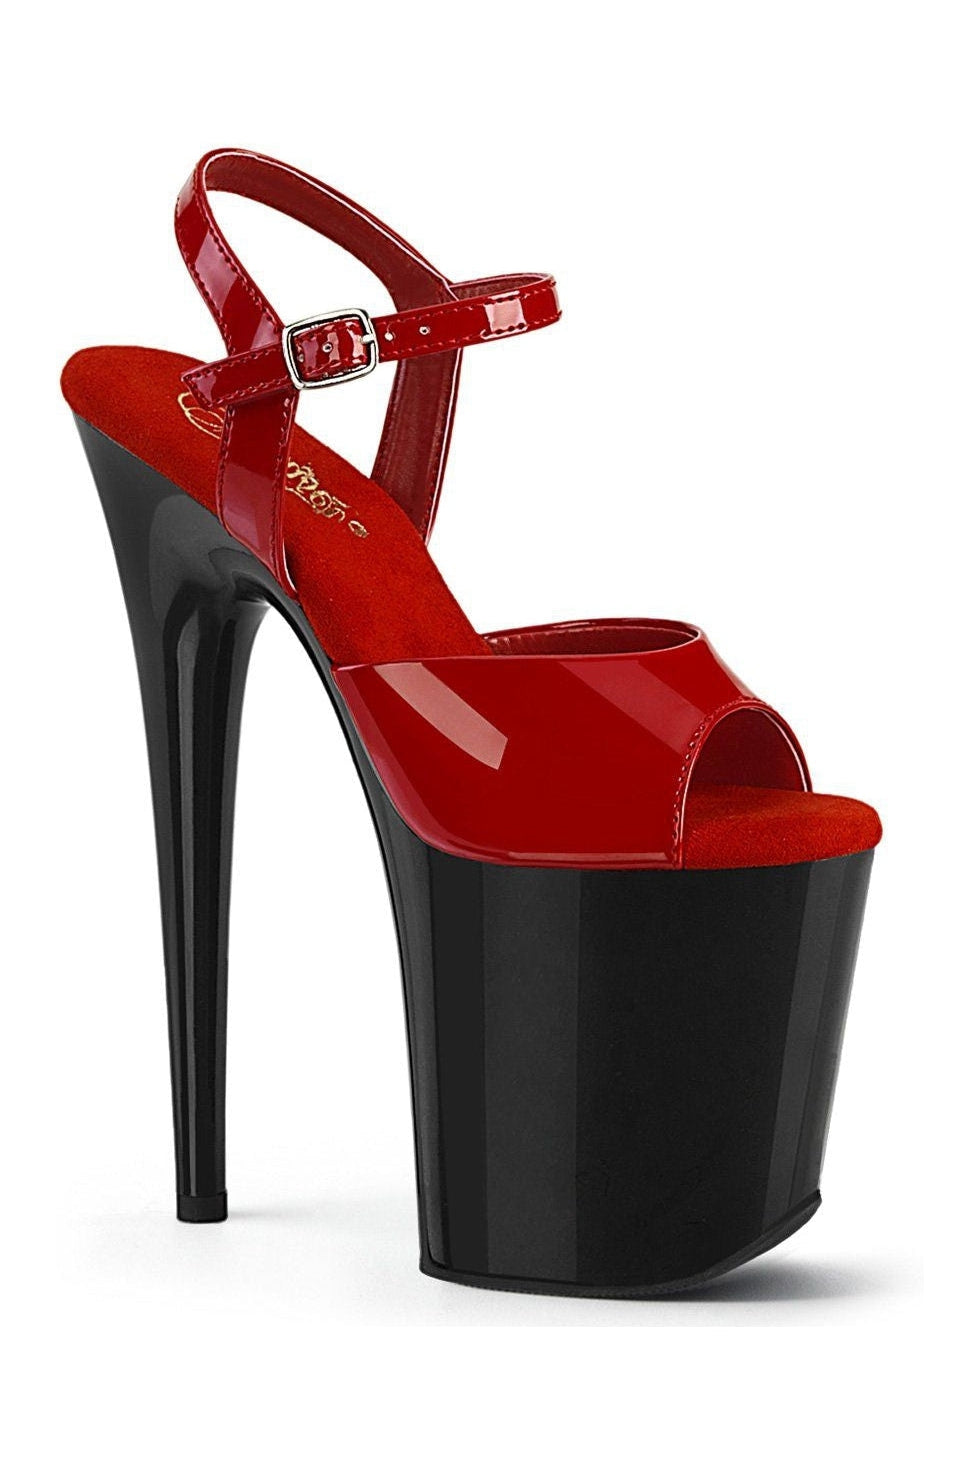 FLAMINGO-809 Sandal | Red Patent-Sandals-Pleaser-Red-10-Patent-SEXYSHOES.COM